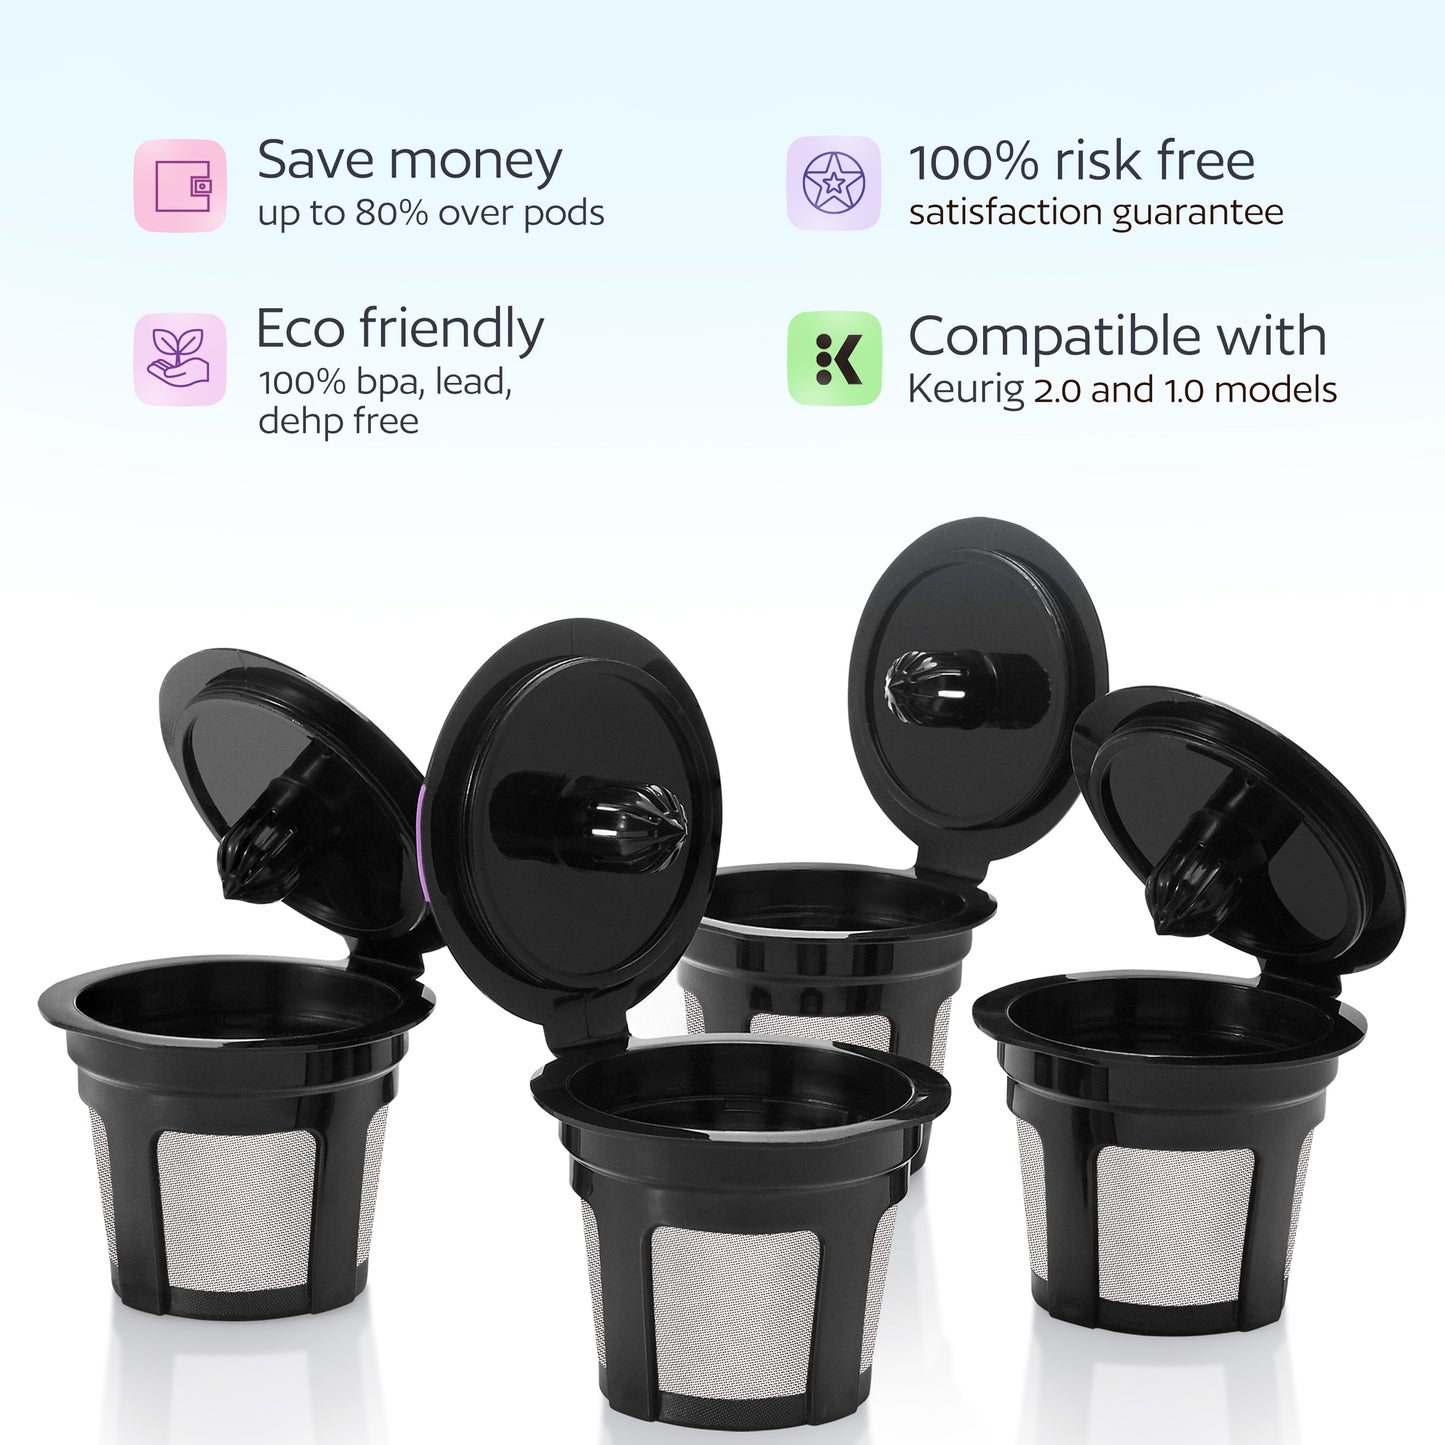 4 Reusable K Cups for Keurig K-Classic, K-Elite, K-Select, K-Cafe, K-Compact, K200, K300, K400, K500, Universal Fit Black Refillable Kcups Coffee Filters for 2.0 and 1.0 Brewers